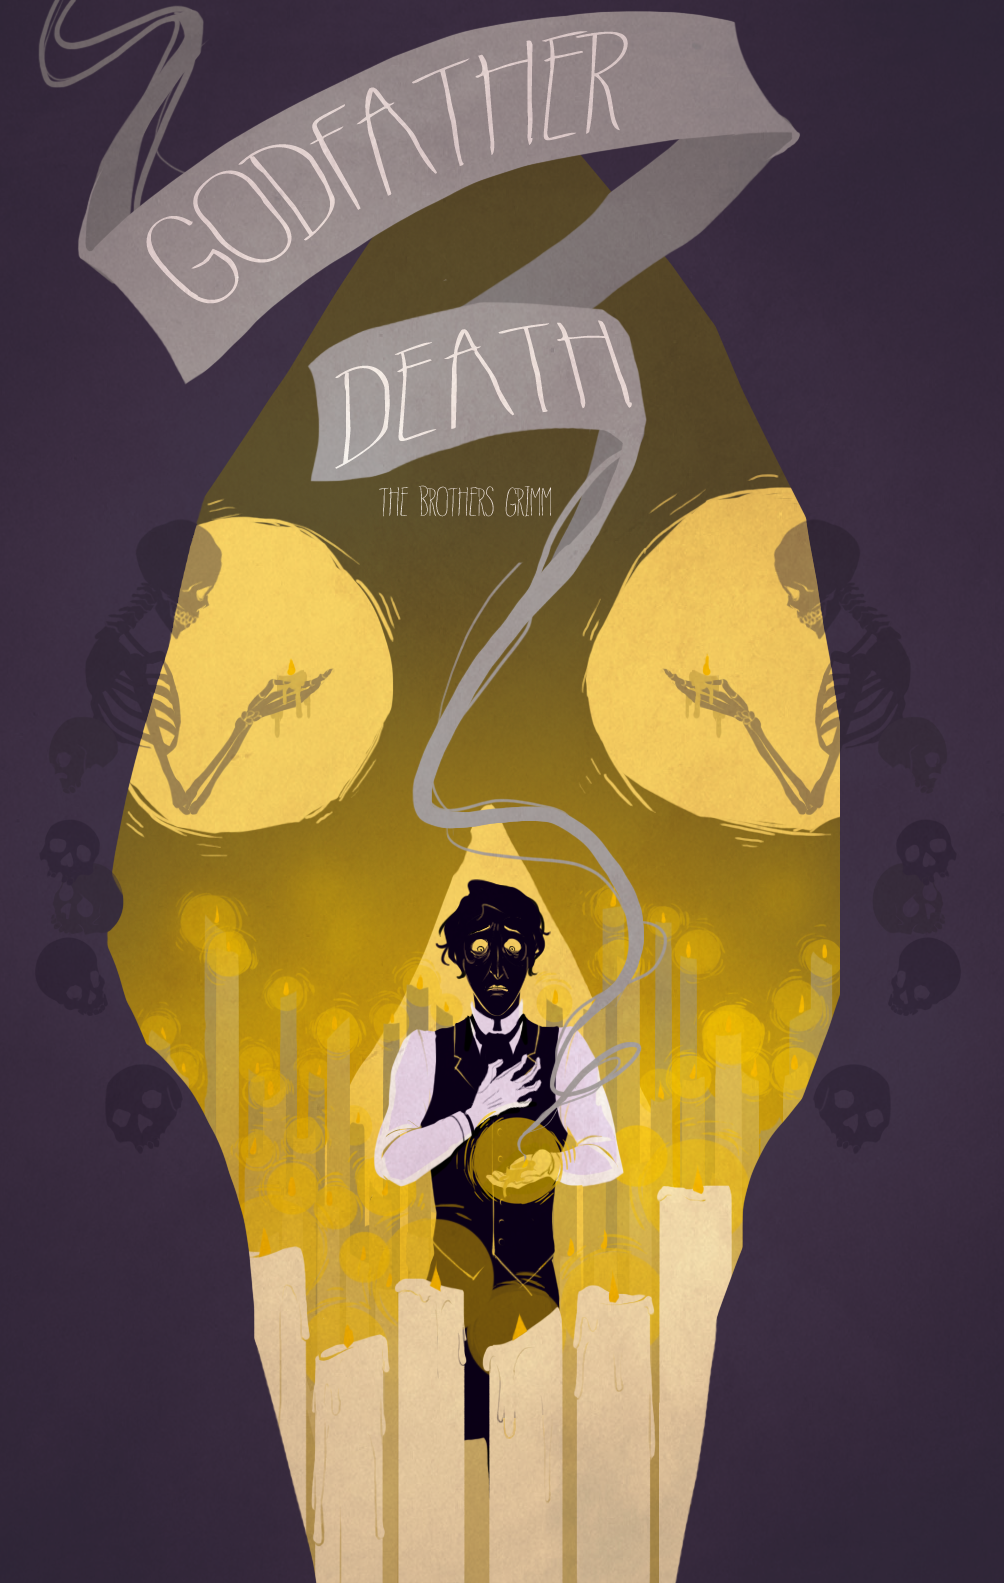 Dressed for Death by Alexa Sharpe